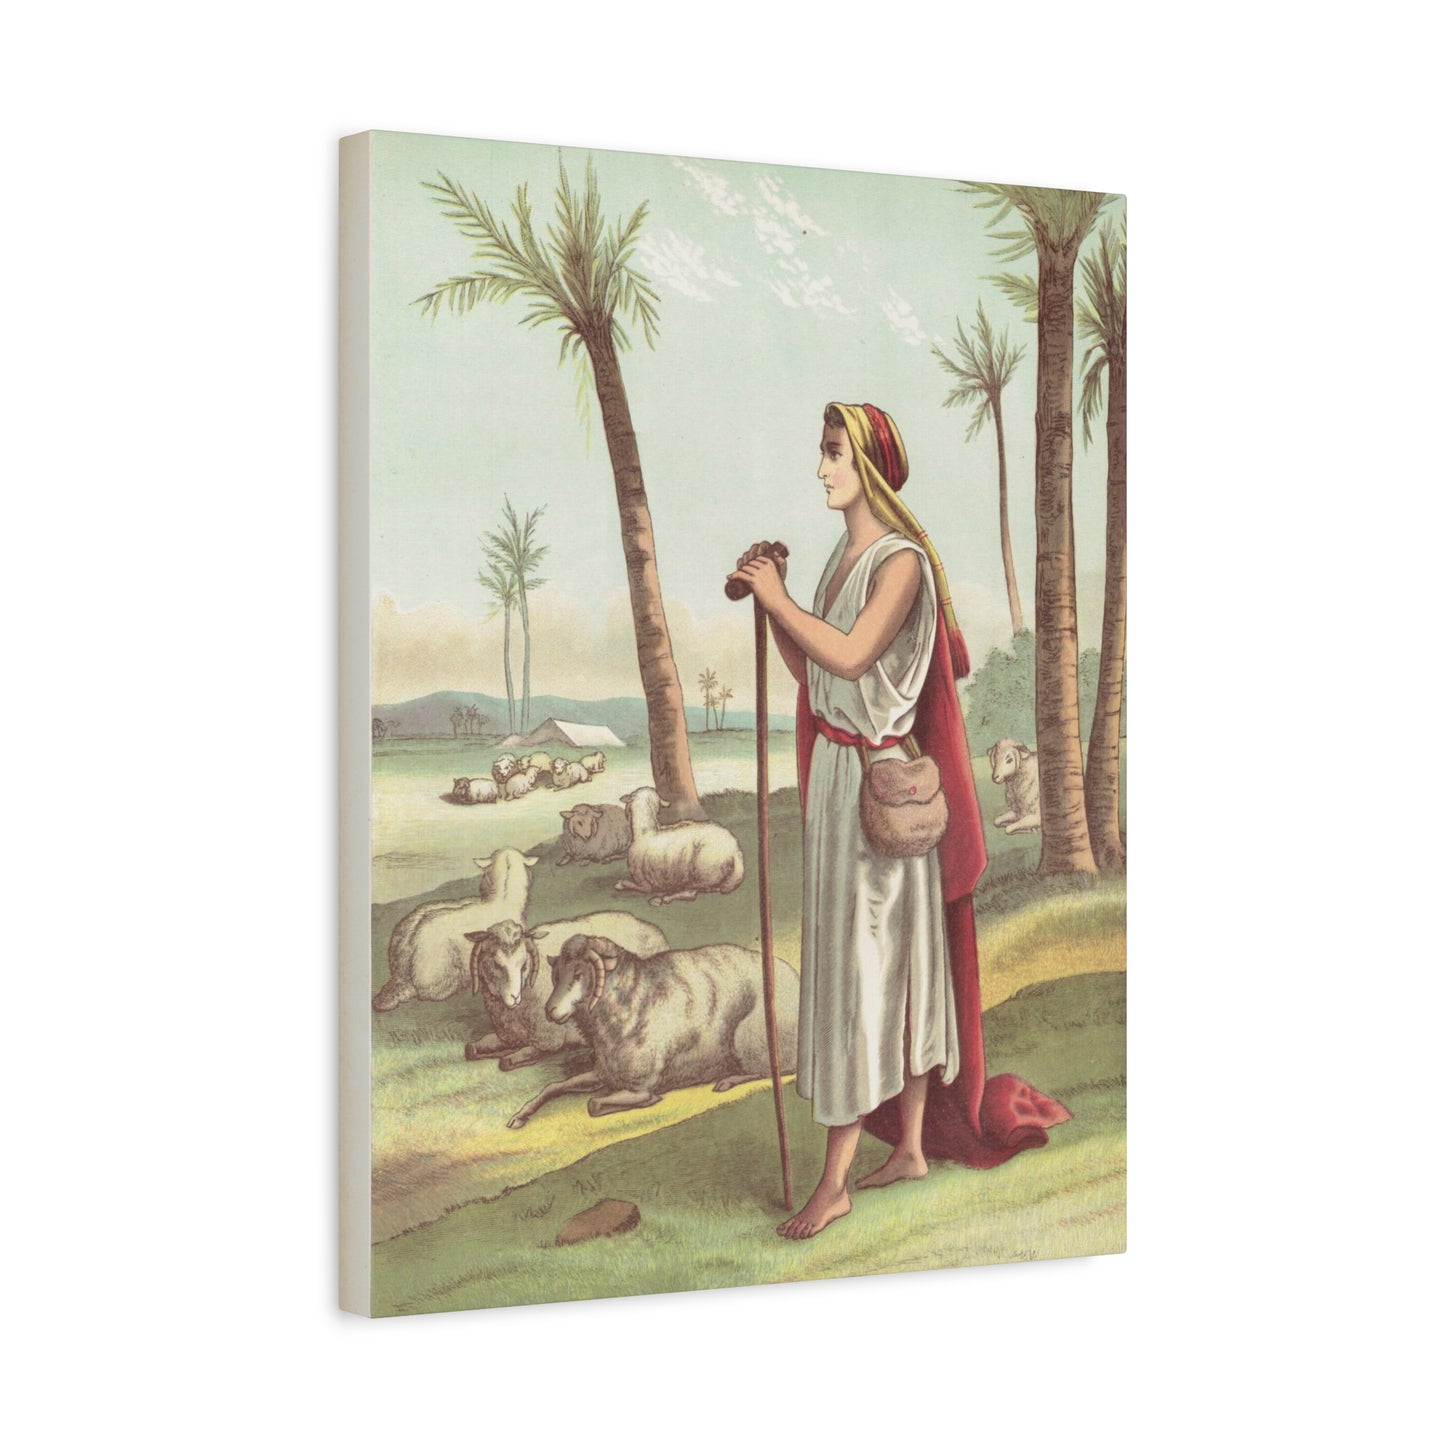 A classic 1885 artwork depicting young David as a shepherd, with a serene expression, caring for his sheep in a peaceful pasture setting, symbolic of his future as a king of Israel.